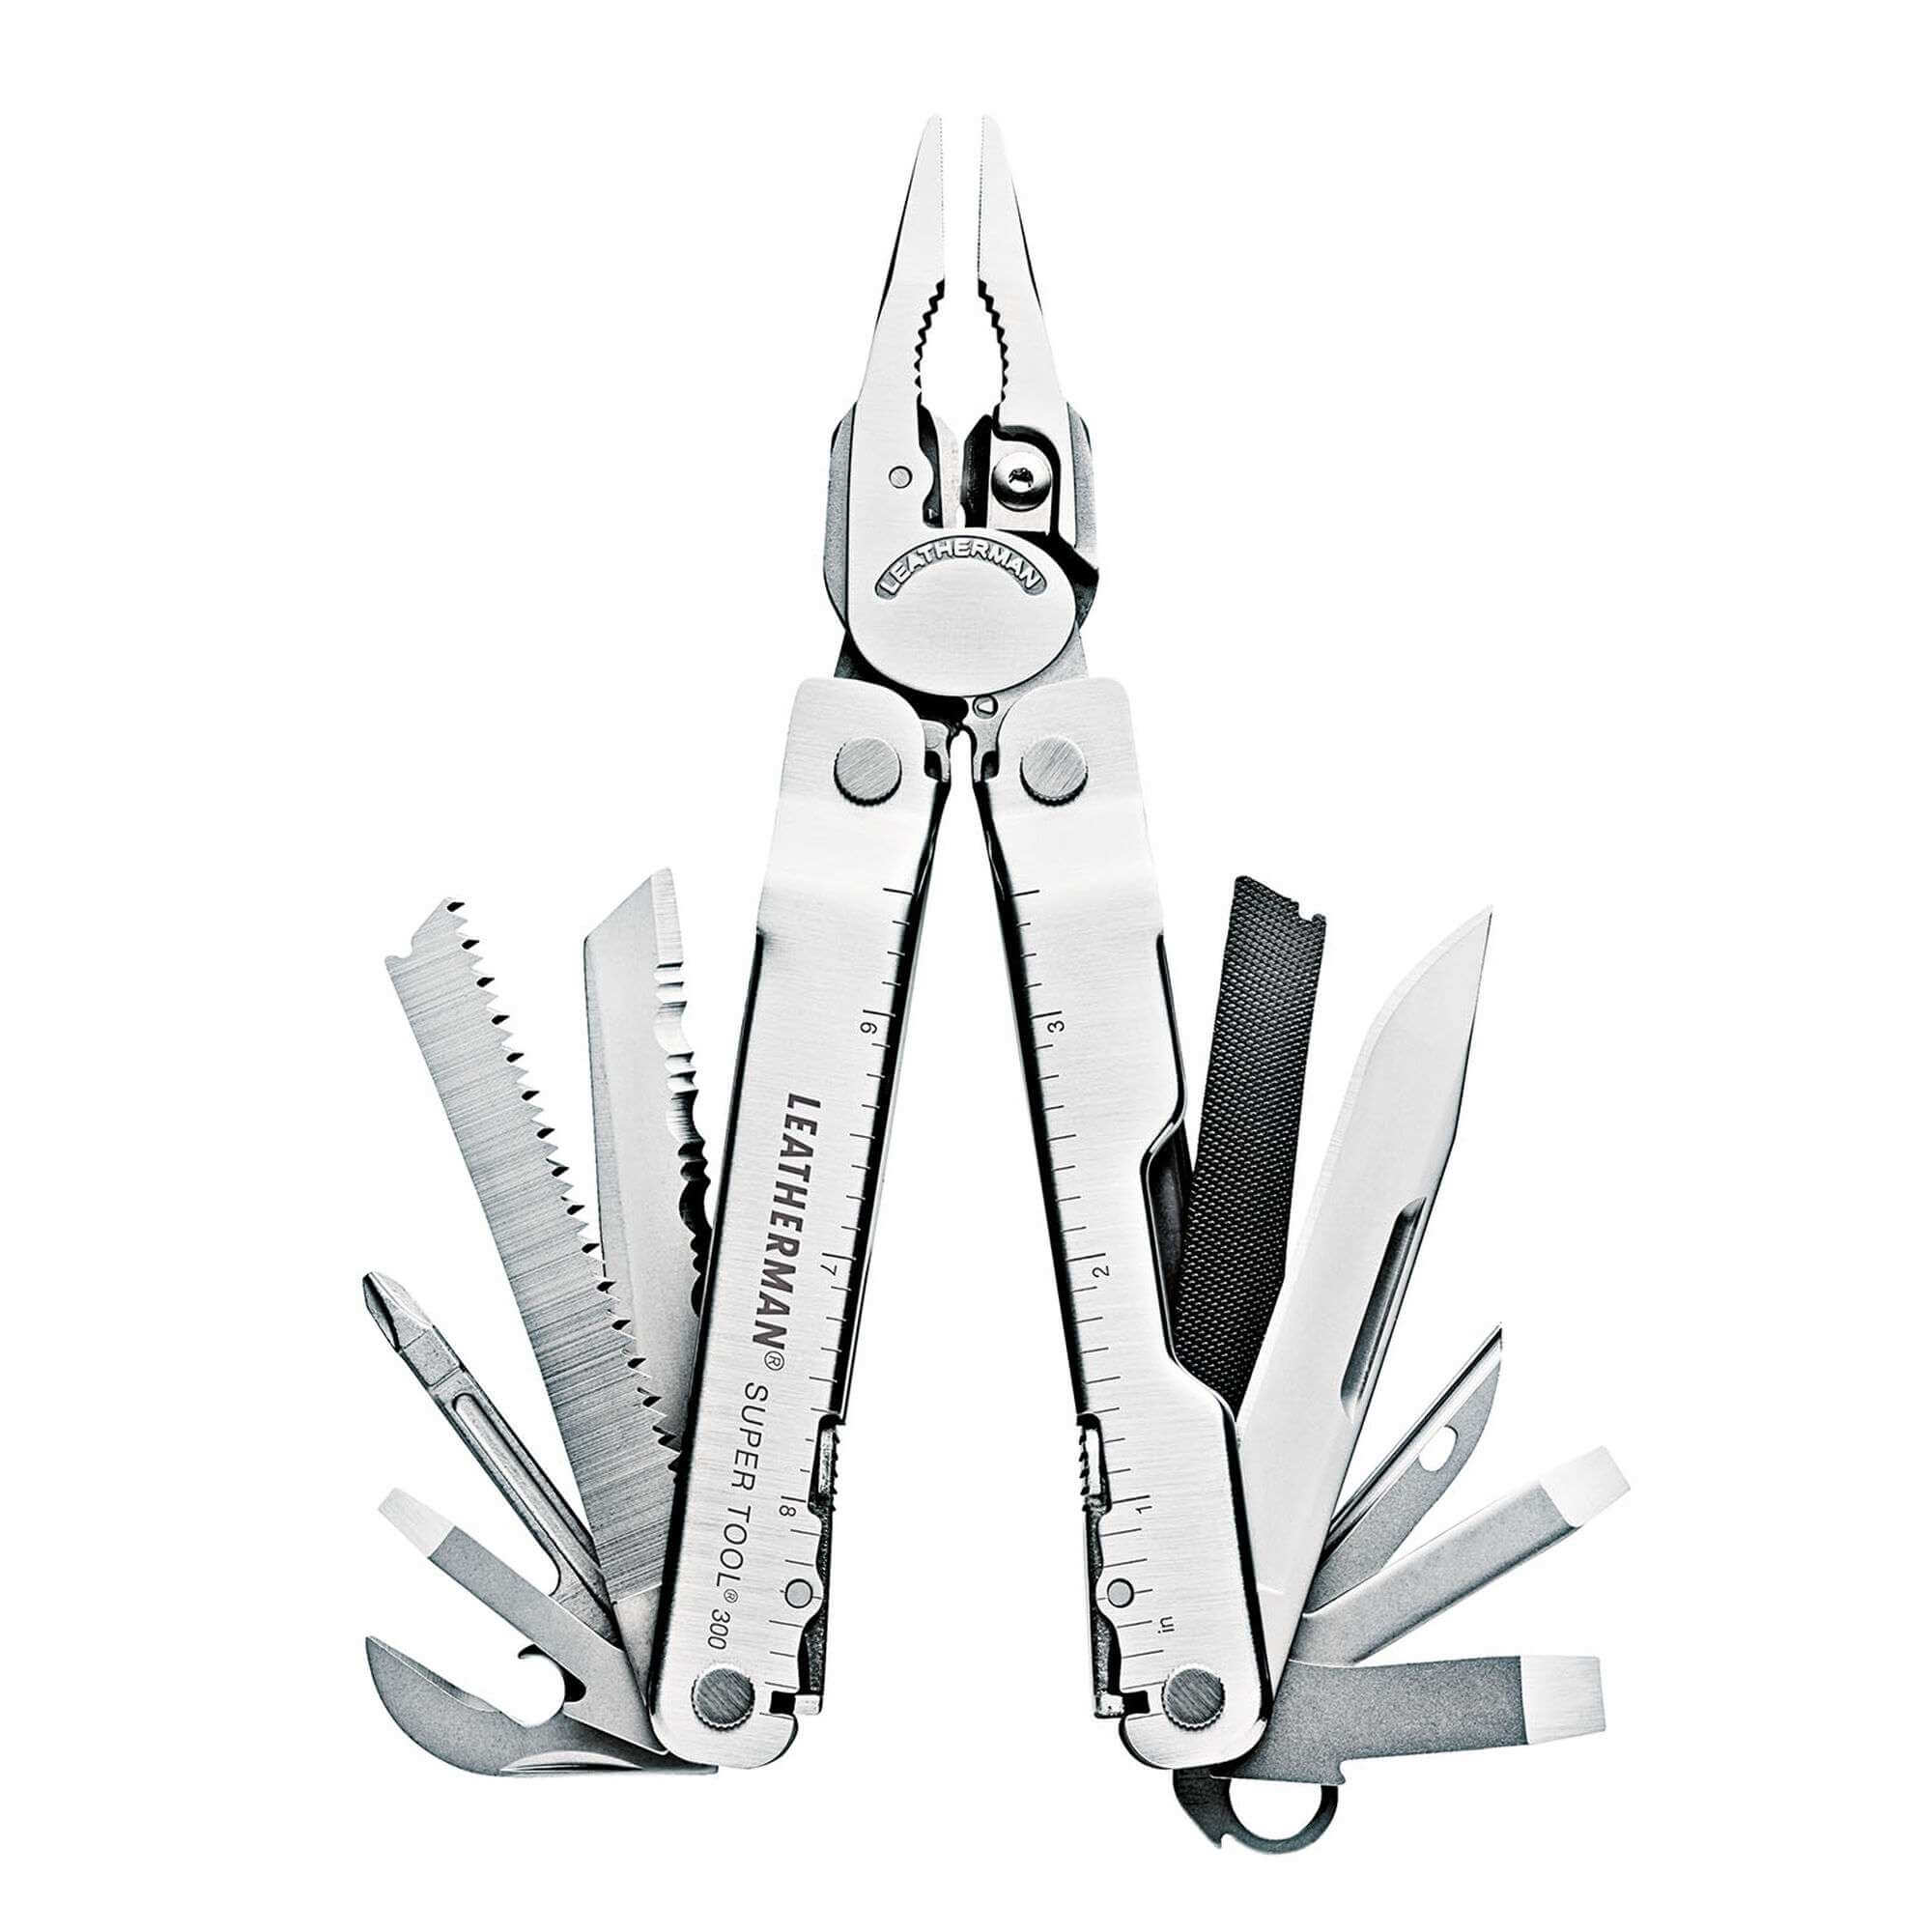 LEATHERMAN Super Tool 300 Stainless